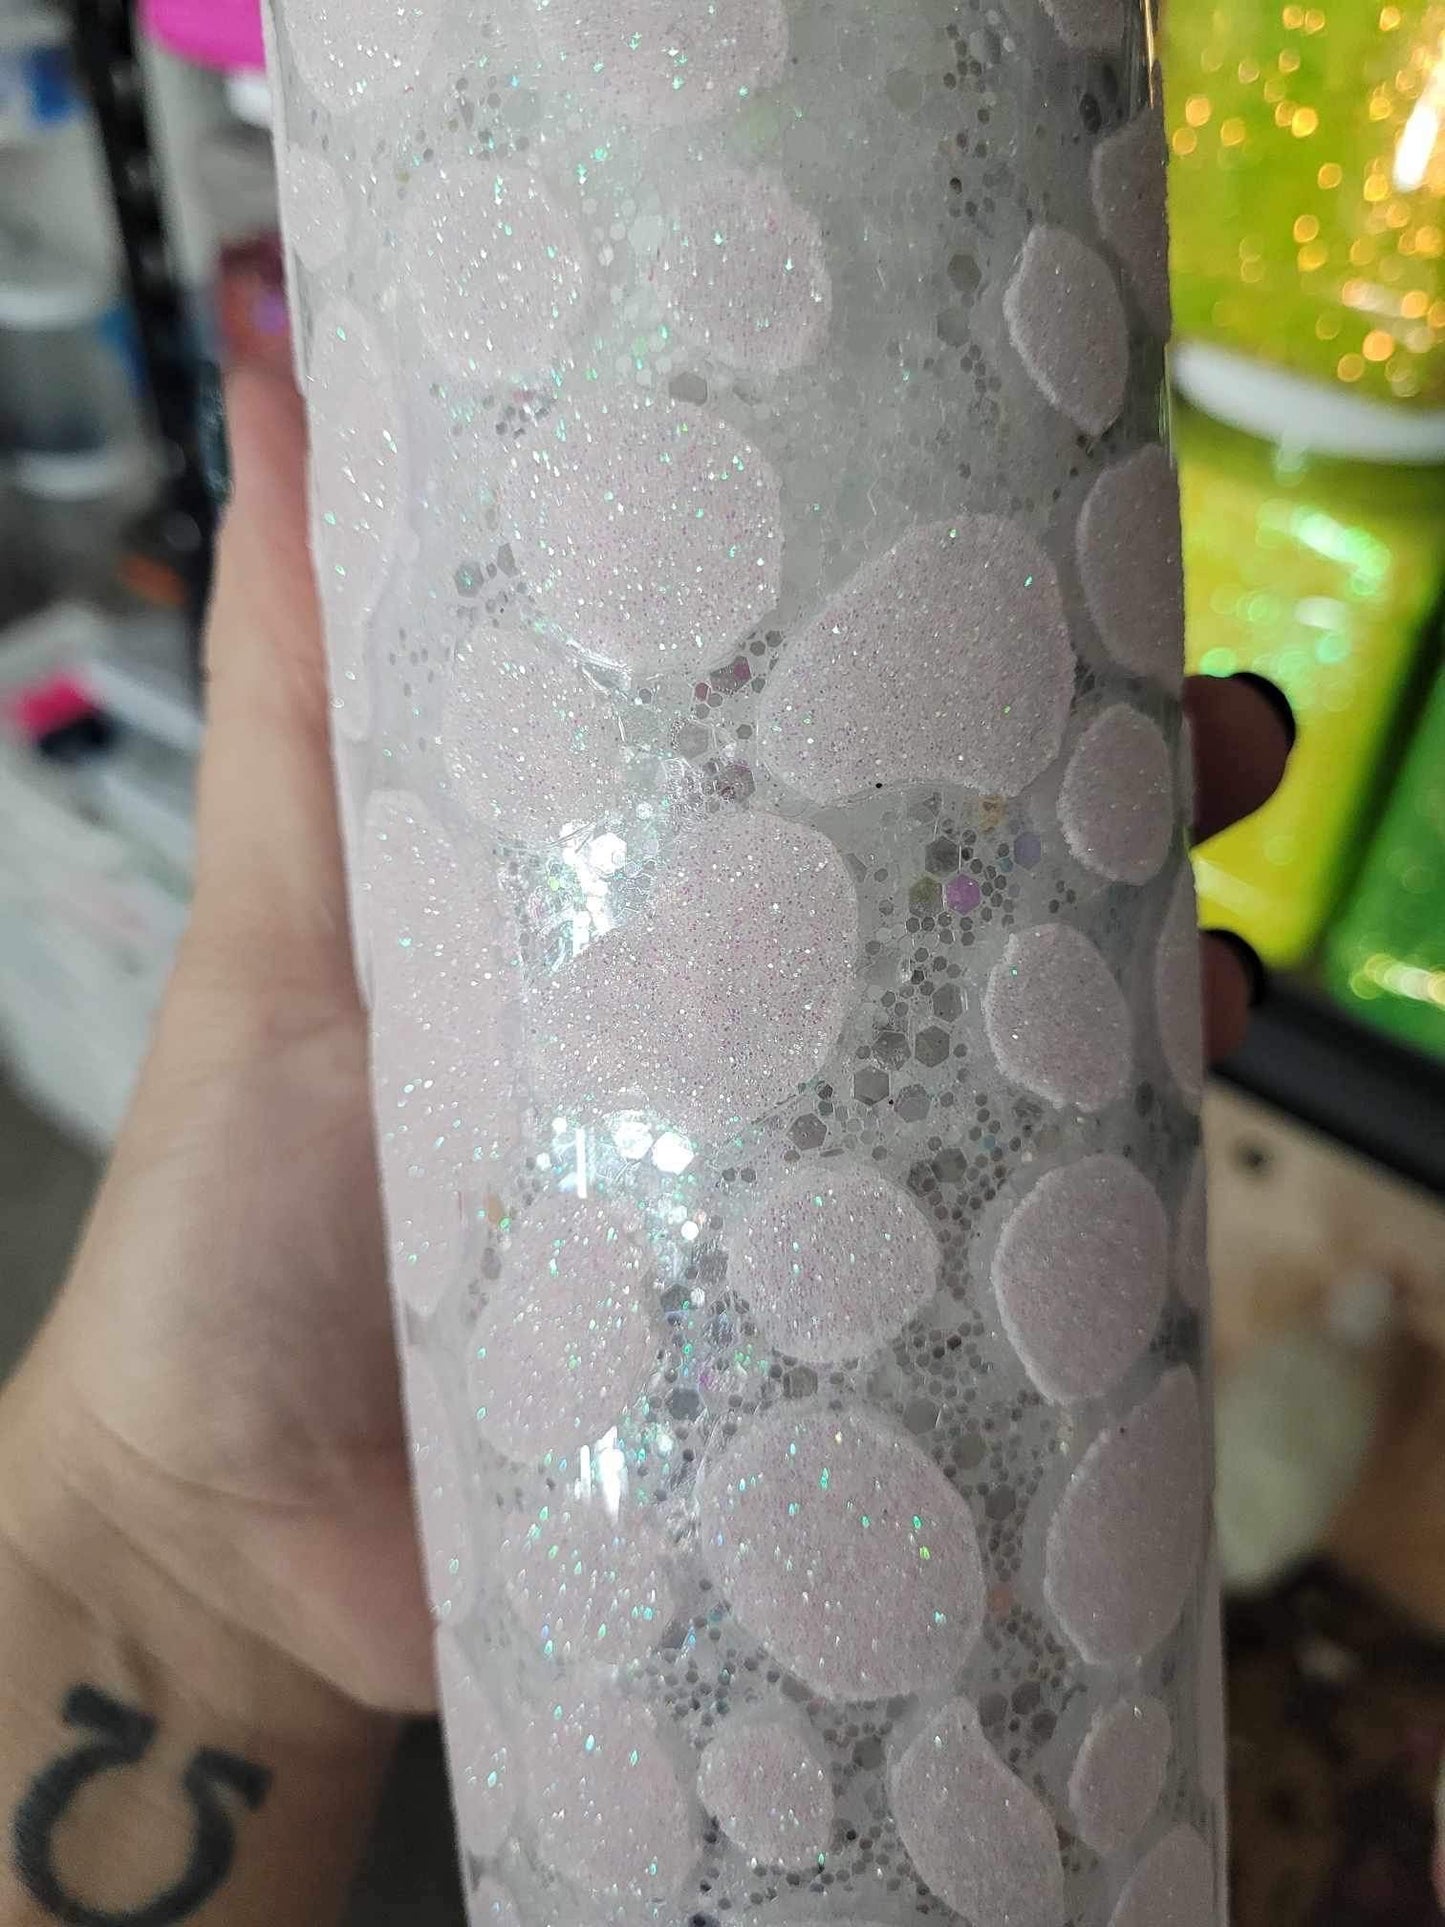 Iridescent Animal Print 20oz STAINLESS Tumbler Cup, Suspended Glitter, Use hot or cold, Handmade, Ships from the USA